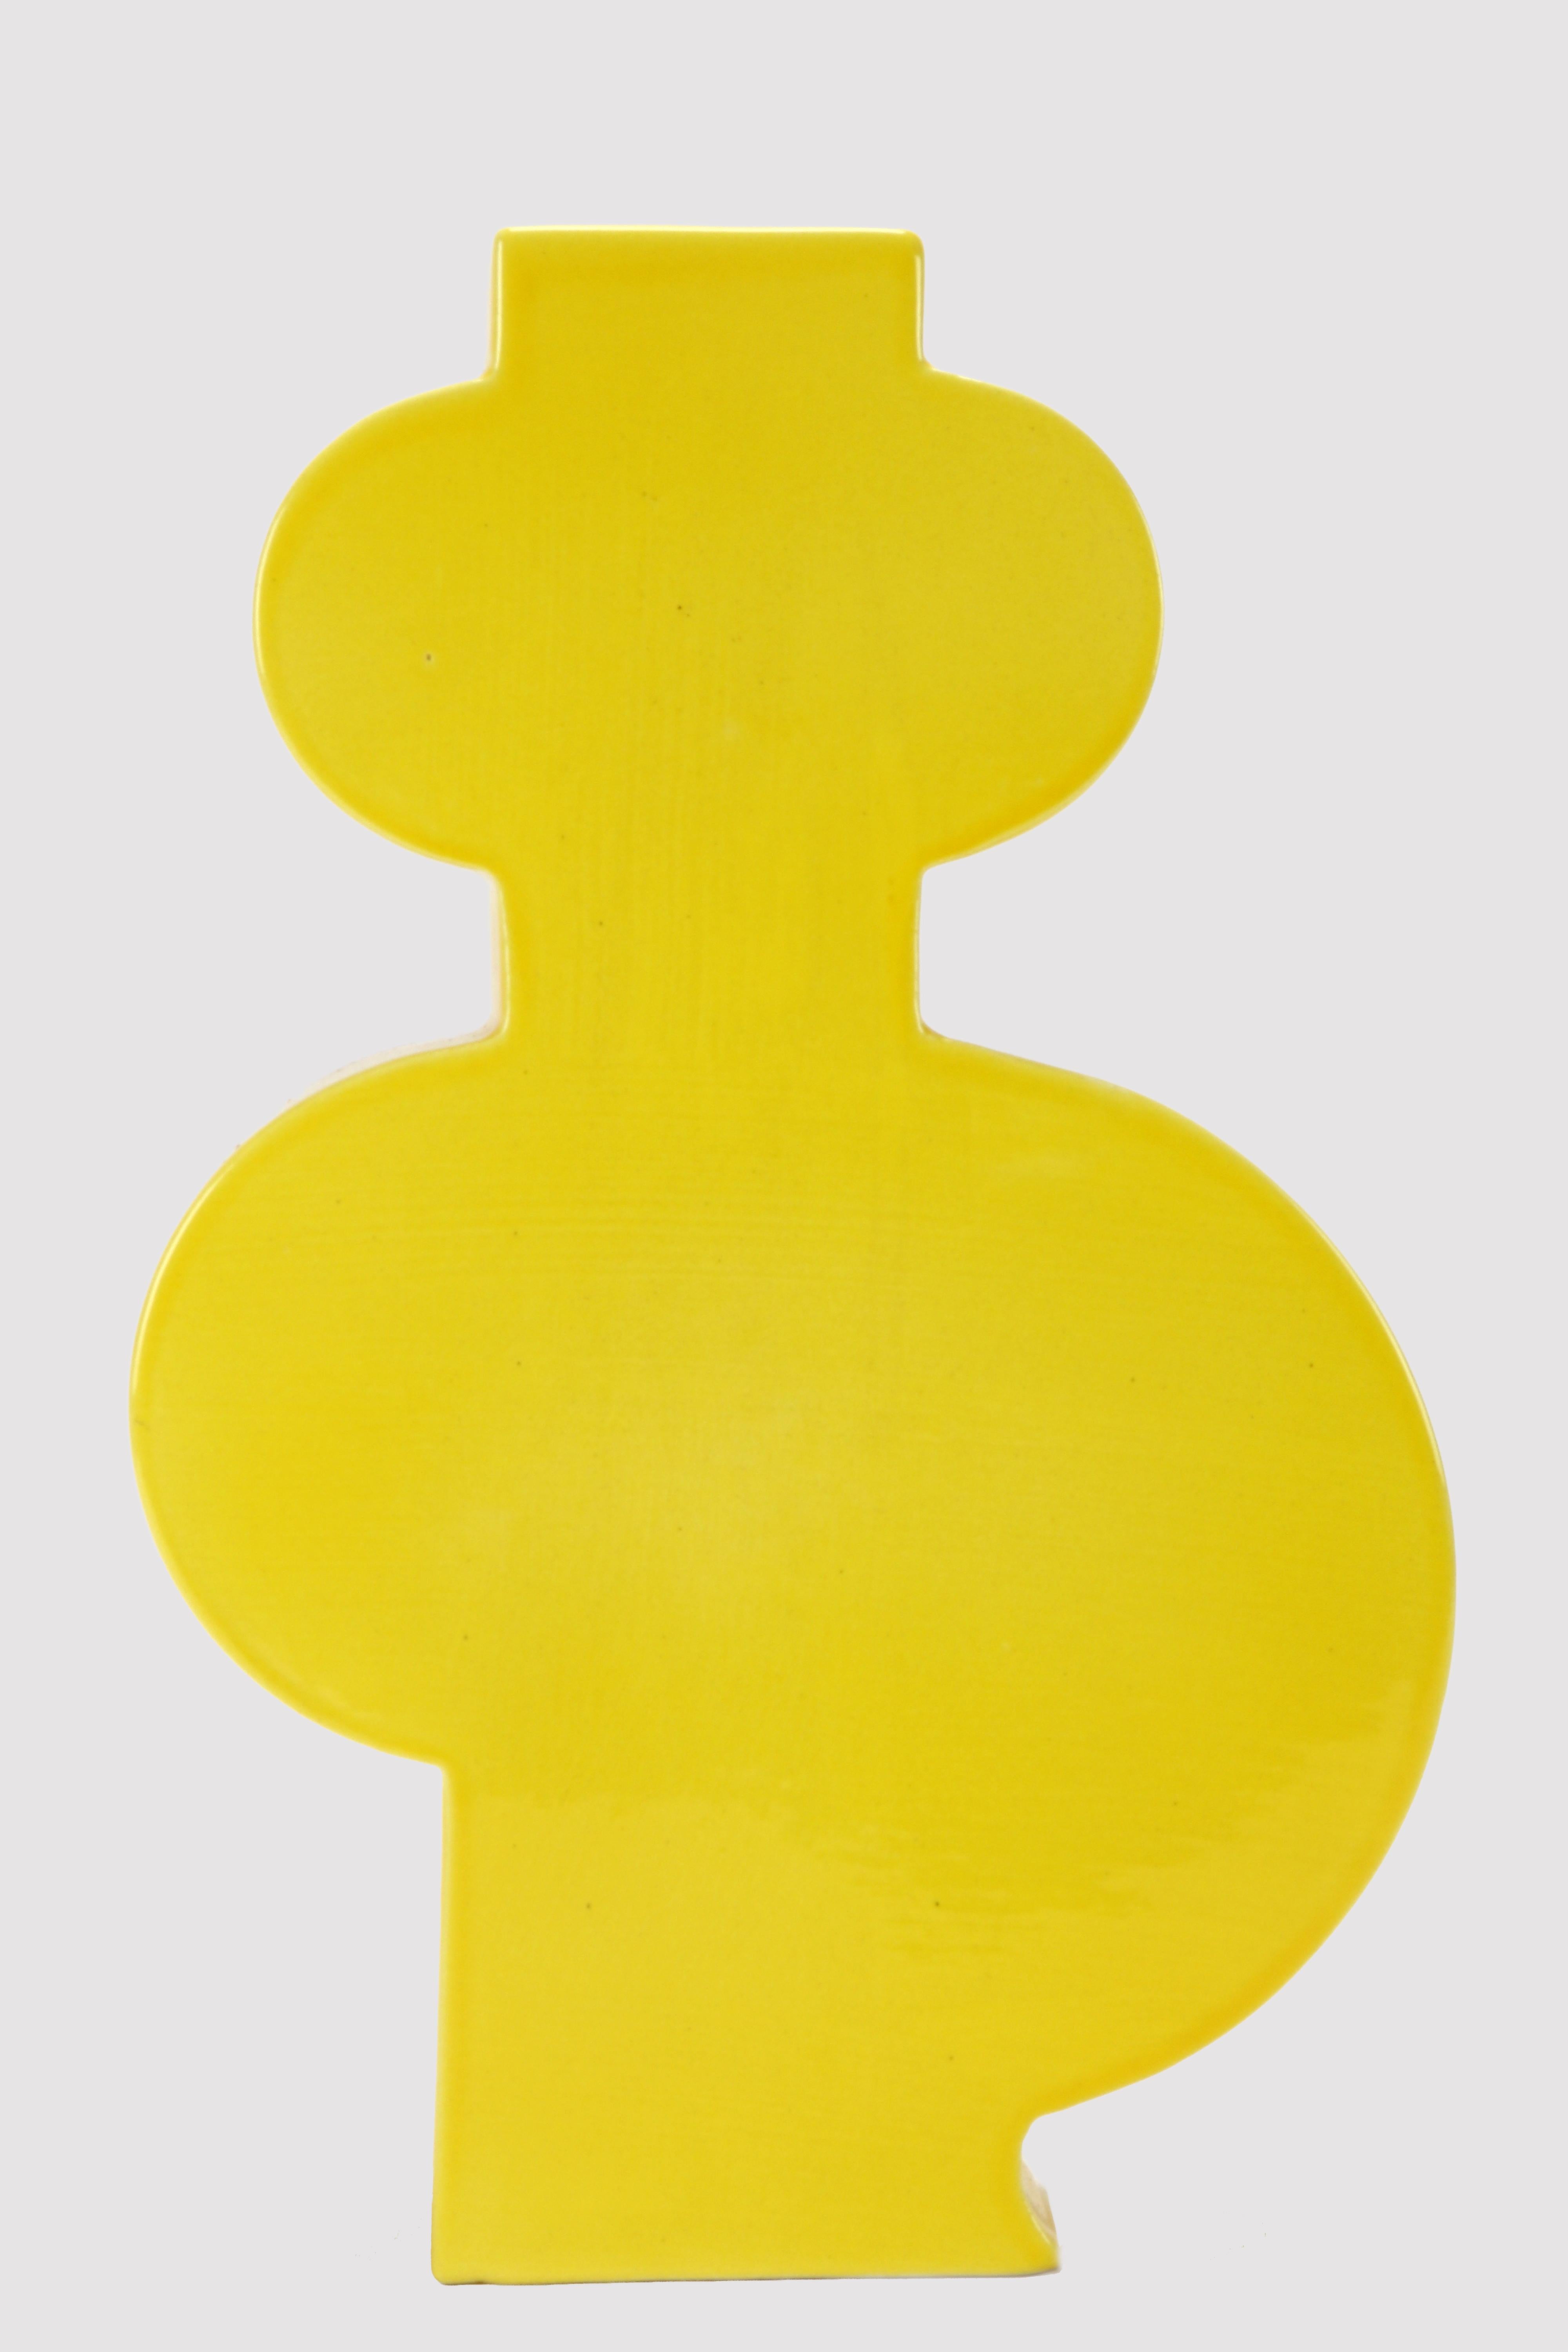 Painted ceramic vase Memphis Milano by Luciano Florio Paccagnella, Lola, yellow color.
He was an important member of the group when he created his series of unique handmade vases. Florio Paccagnella studied advertising graphics at the Liceo